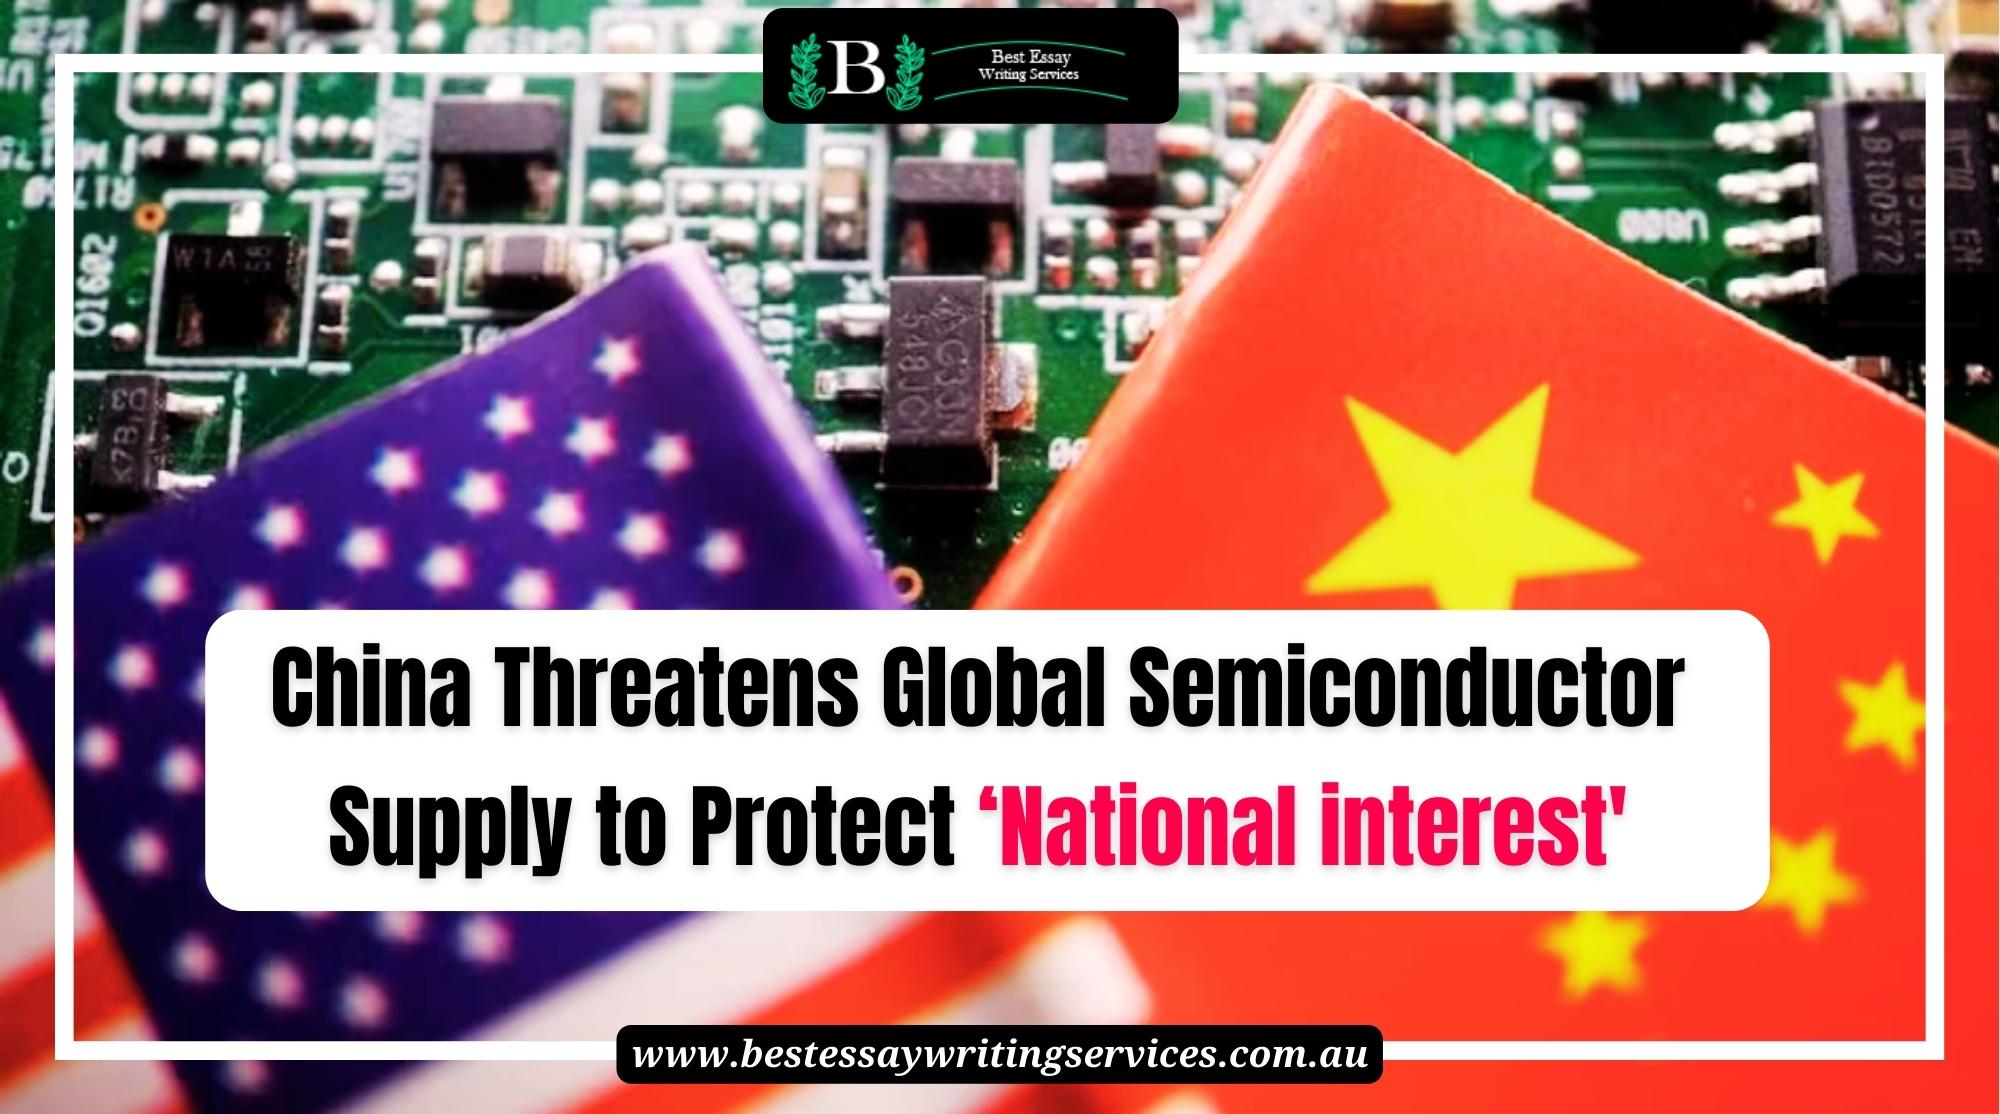 China Threatens Global Semiconductor Supply To Protect ‘National Interest.’